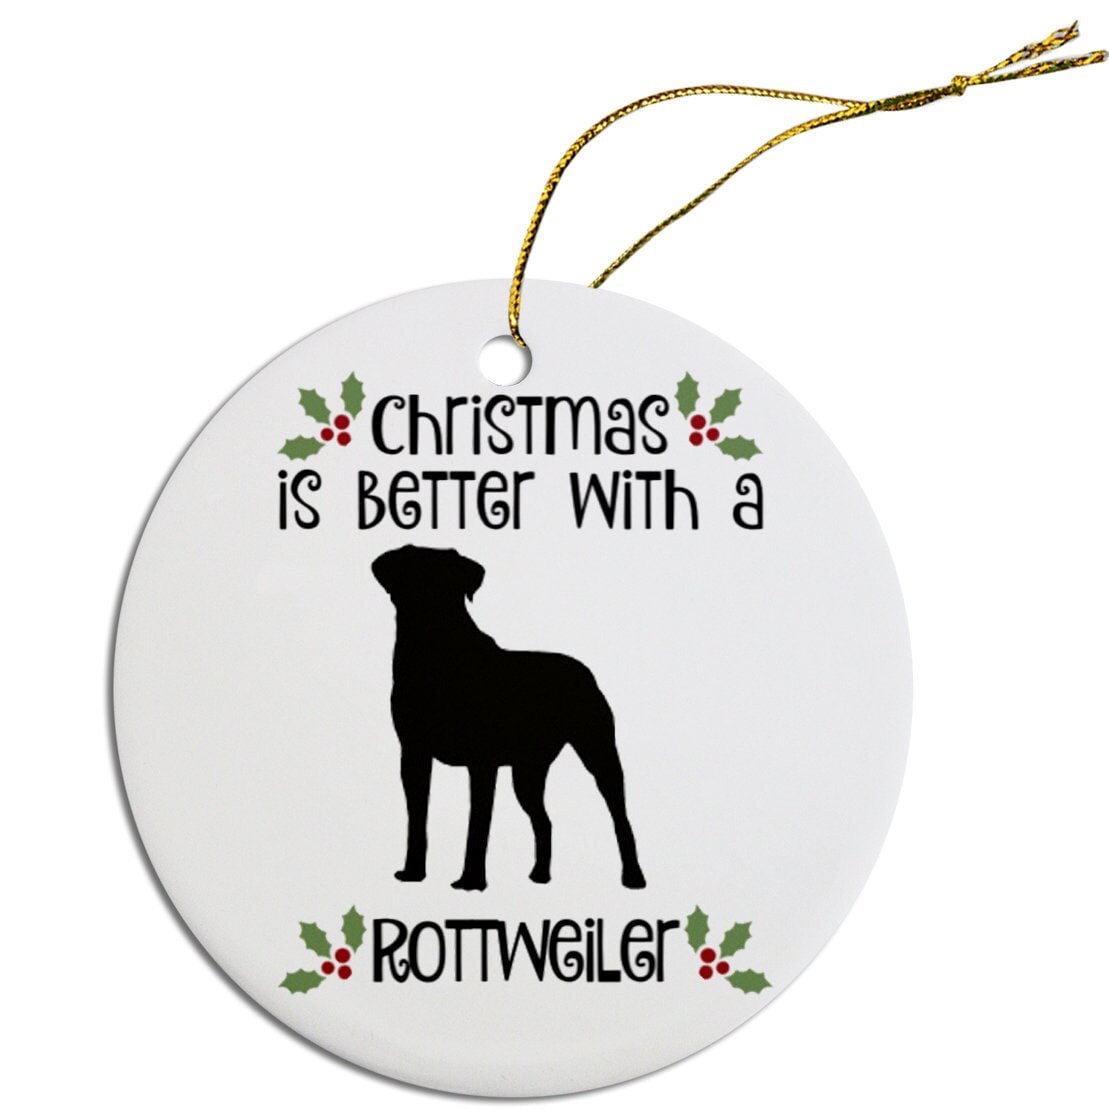 Dog Breed Specific Round Christmas Ornament, "Rottweiler"